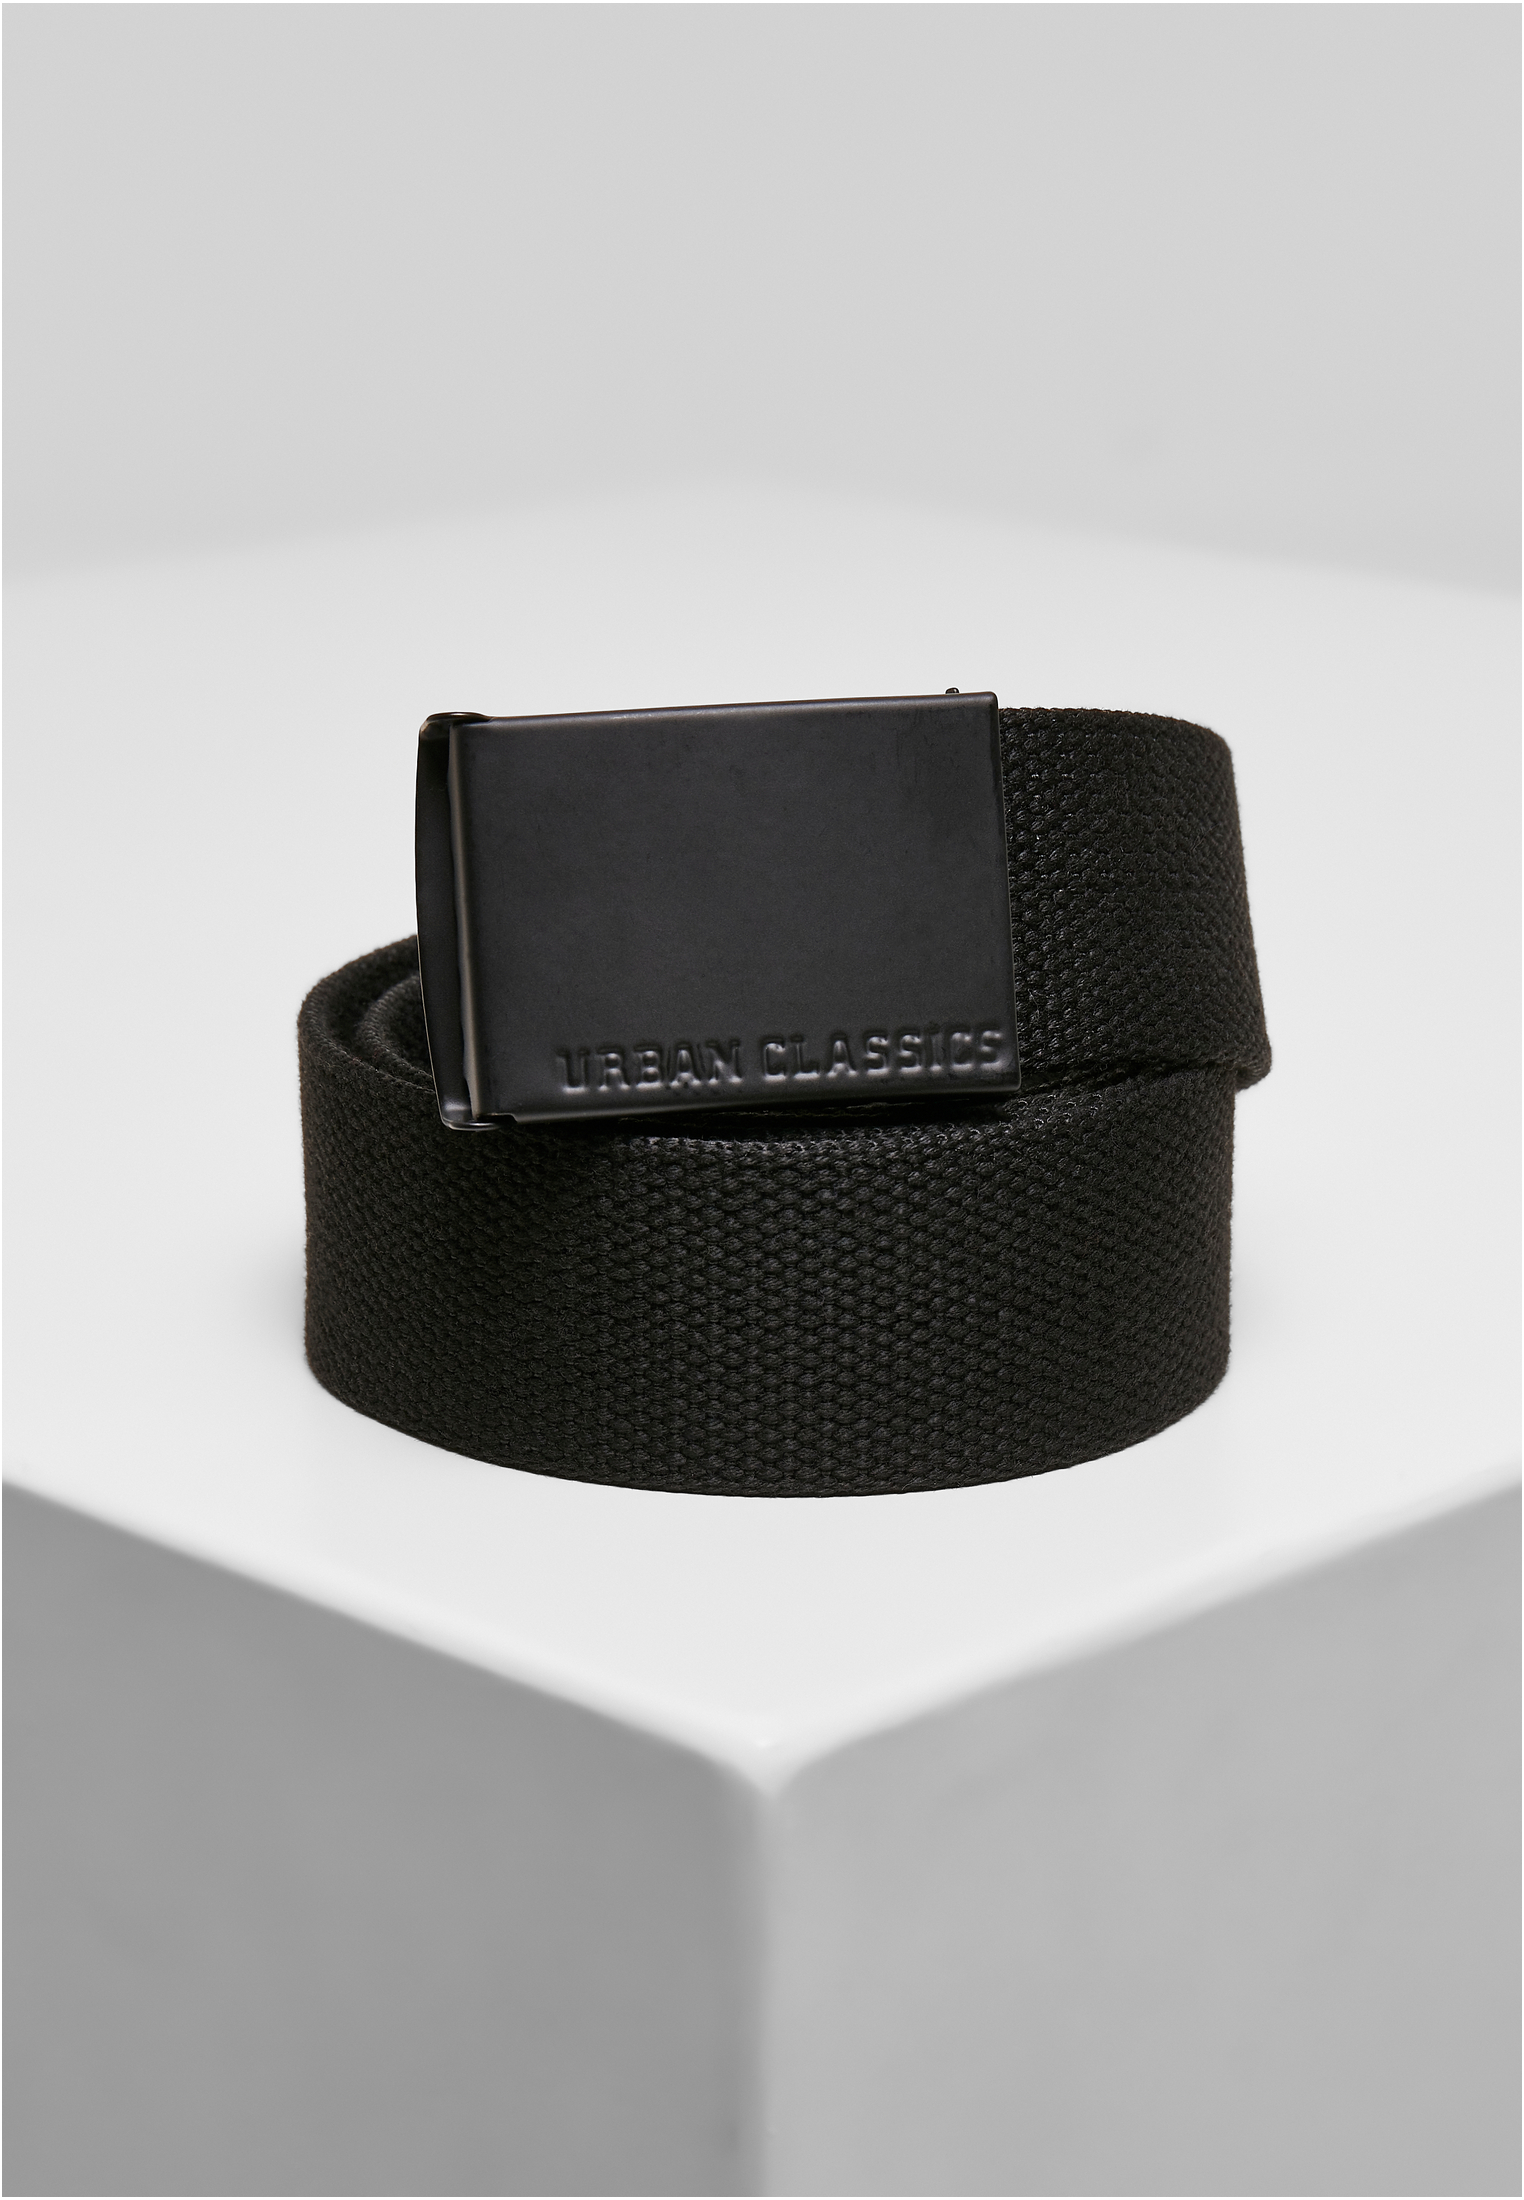 G?rtel Colored Buckle Canvas Belt 2-Pack in Farbe black/olive